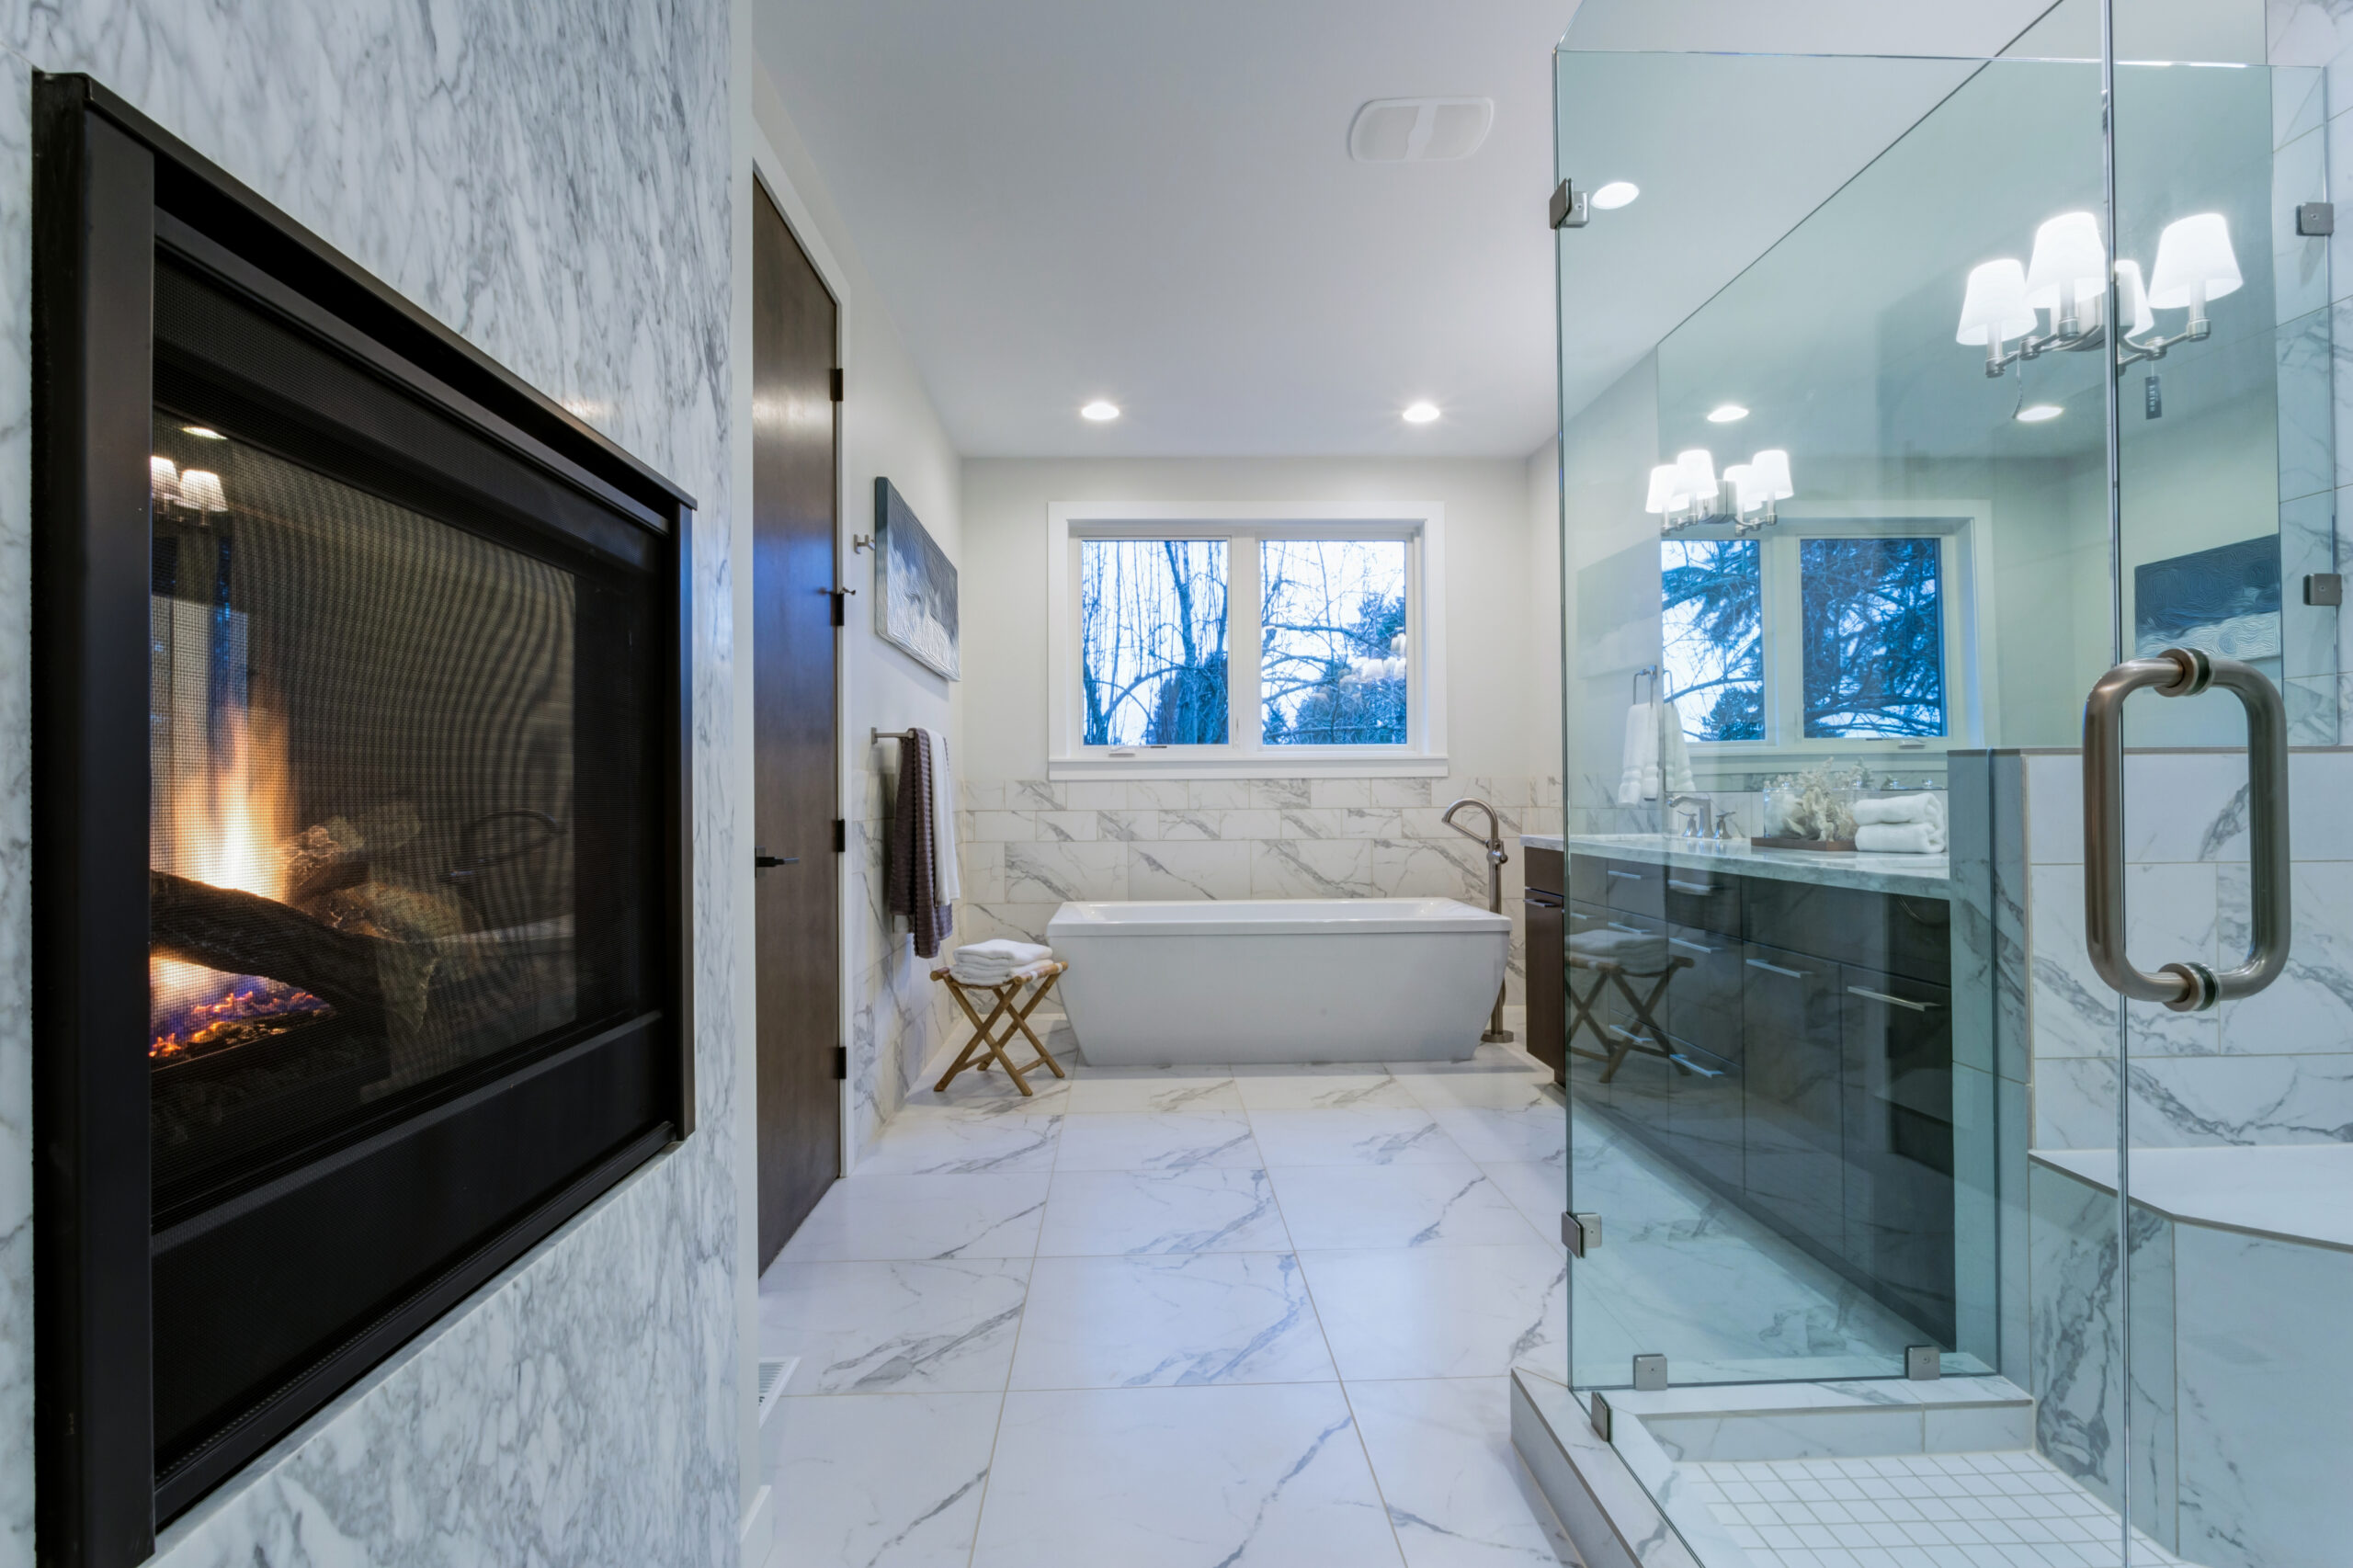 Incredible master bathroom with fireplace, Carrara marble tile surround, modern glass walk in shower, espresso dual vanity cabinet and a freestanding bathtub.